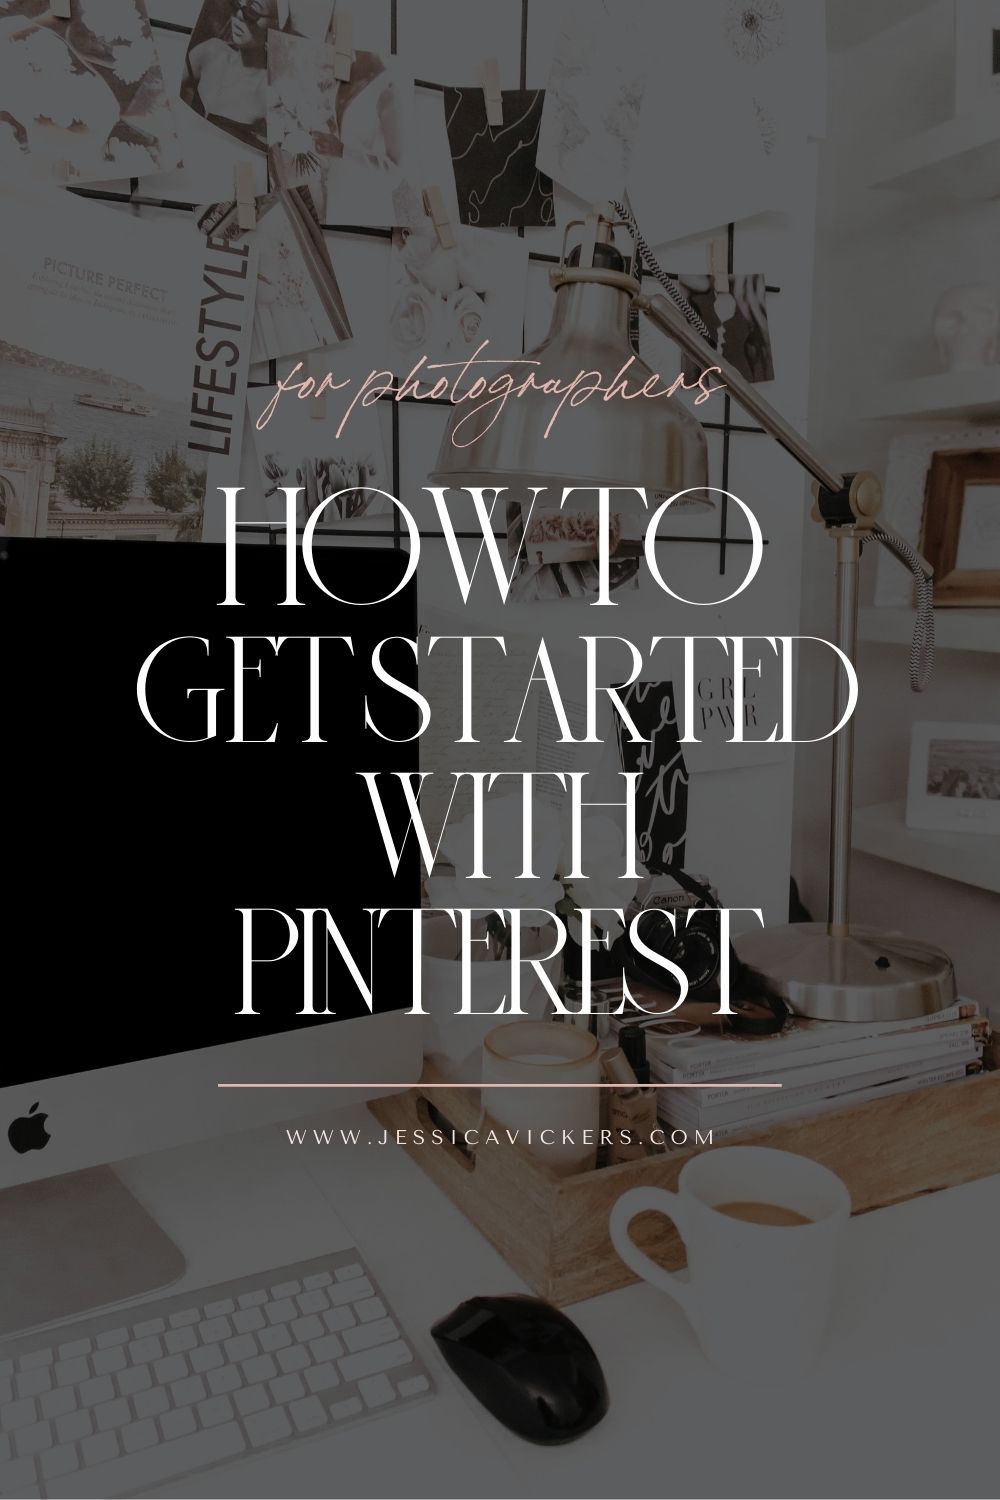 How to Get Started With Pinterest (for Photographers)